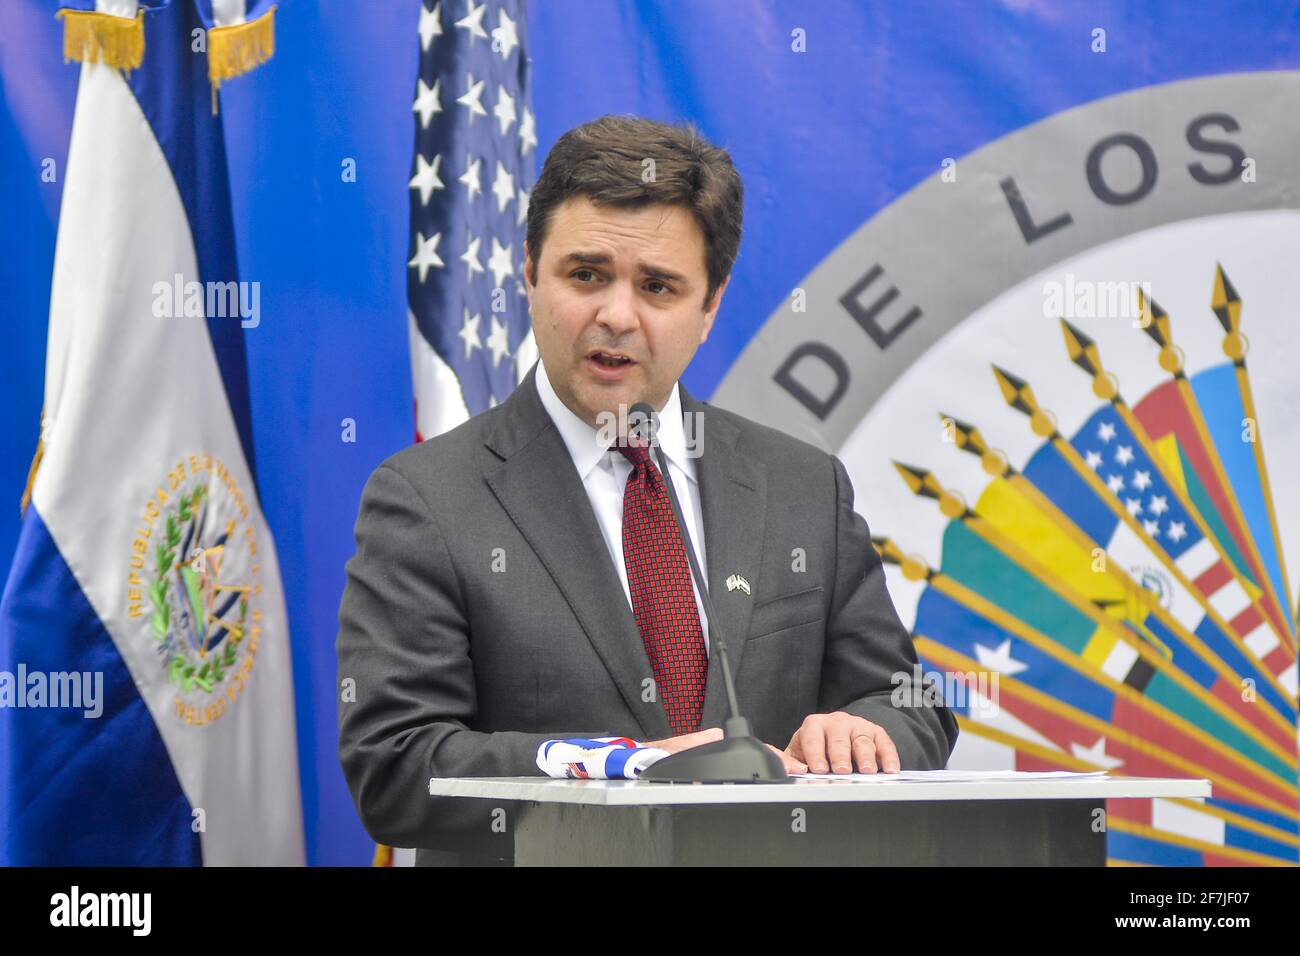 April 7, 2021, San Salvador, El Salvador: US Special Envoy RICARDO ZUNIGA speaks during a press conference. Zuniga and US charge d'affaires B. O'Brien meets with Salvadoran Attorney General  and CICIES commissioner. The Biden administration deployed Special Envoy on a 3 day trip to look into causes of migration and ways to implement new programs in the new administration's foreign policy. (Credit Image: © Camilo Freedman/ZUMA Wire) Stock Photo